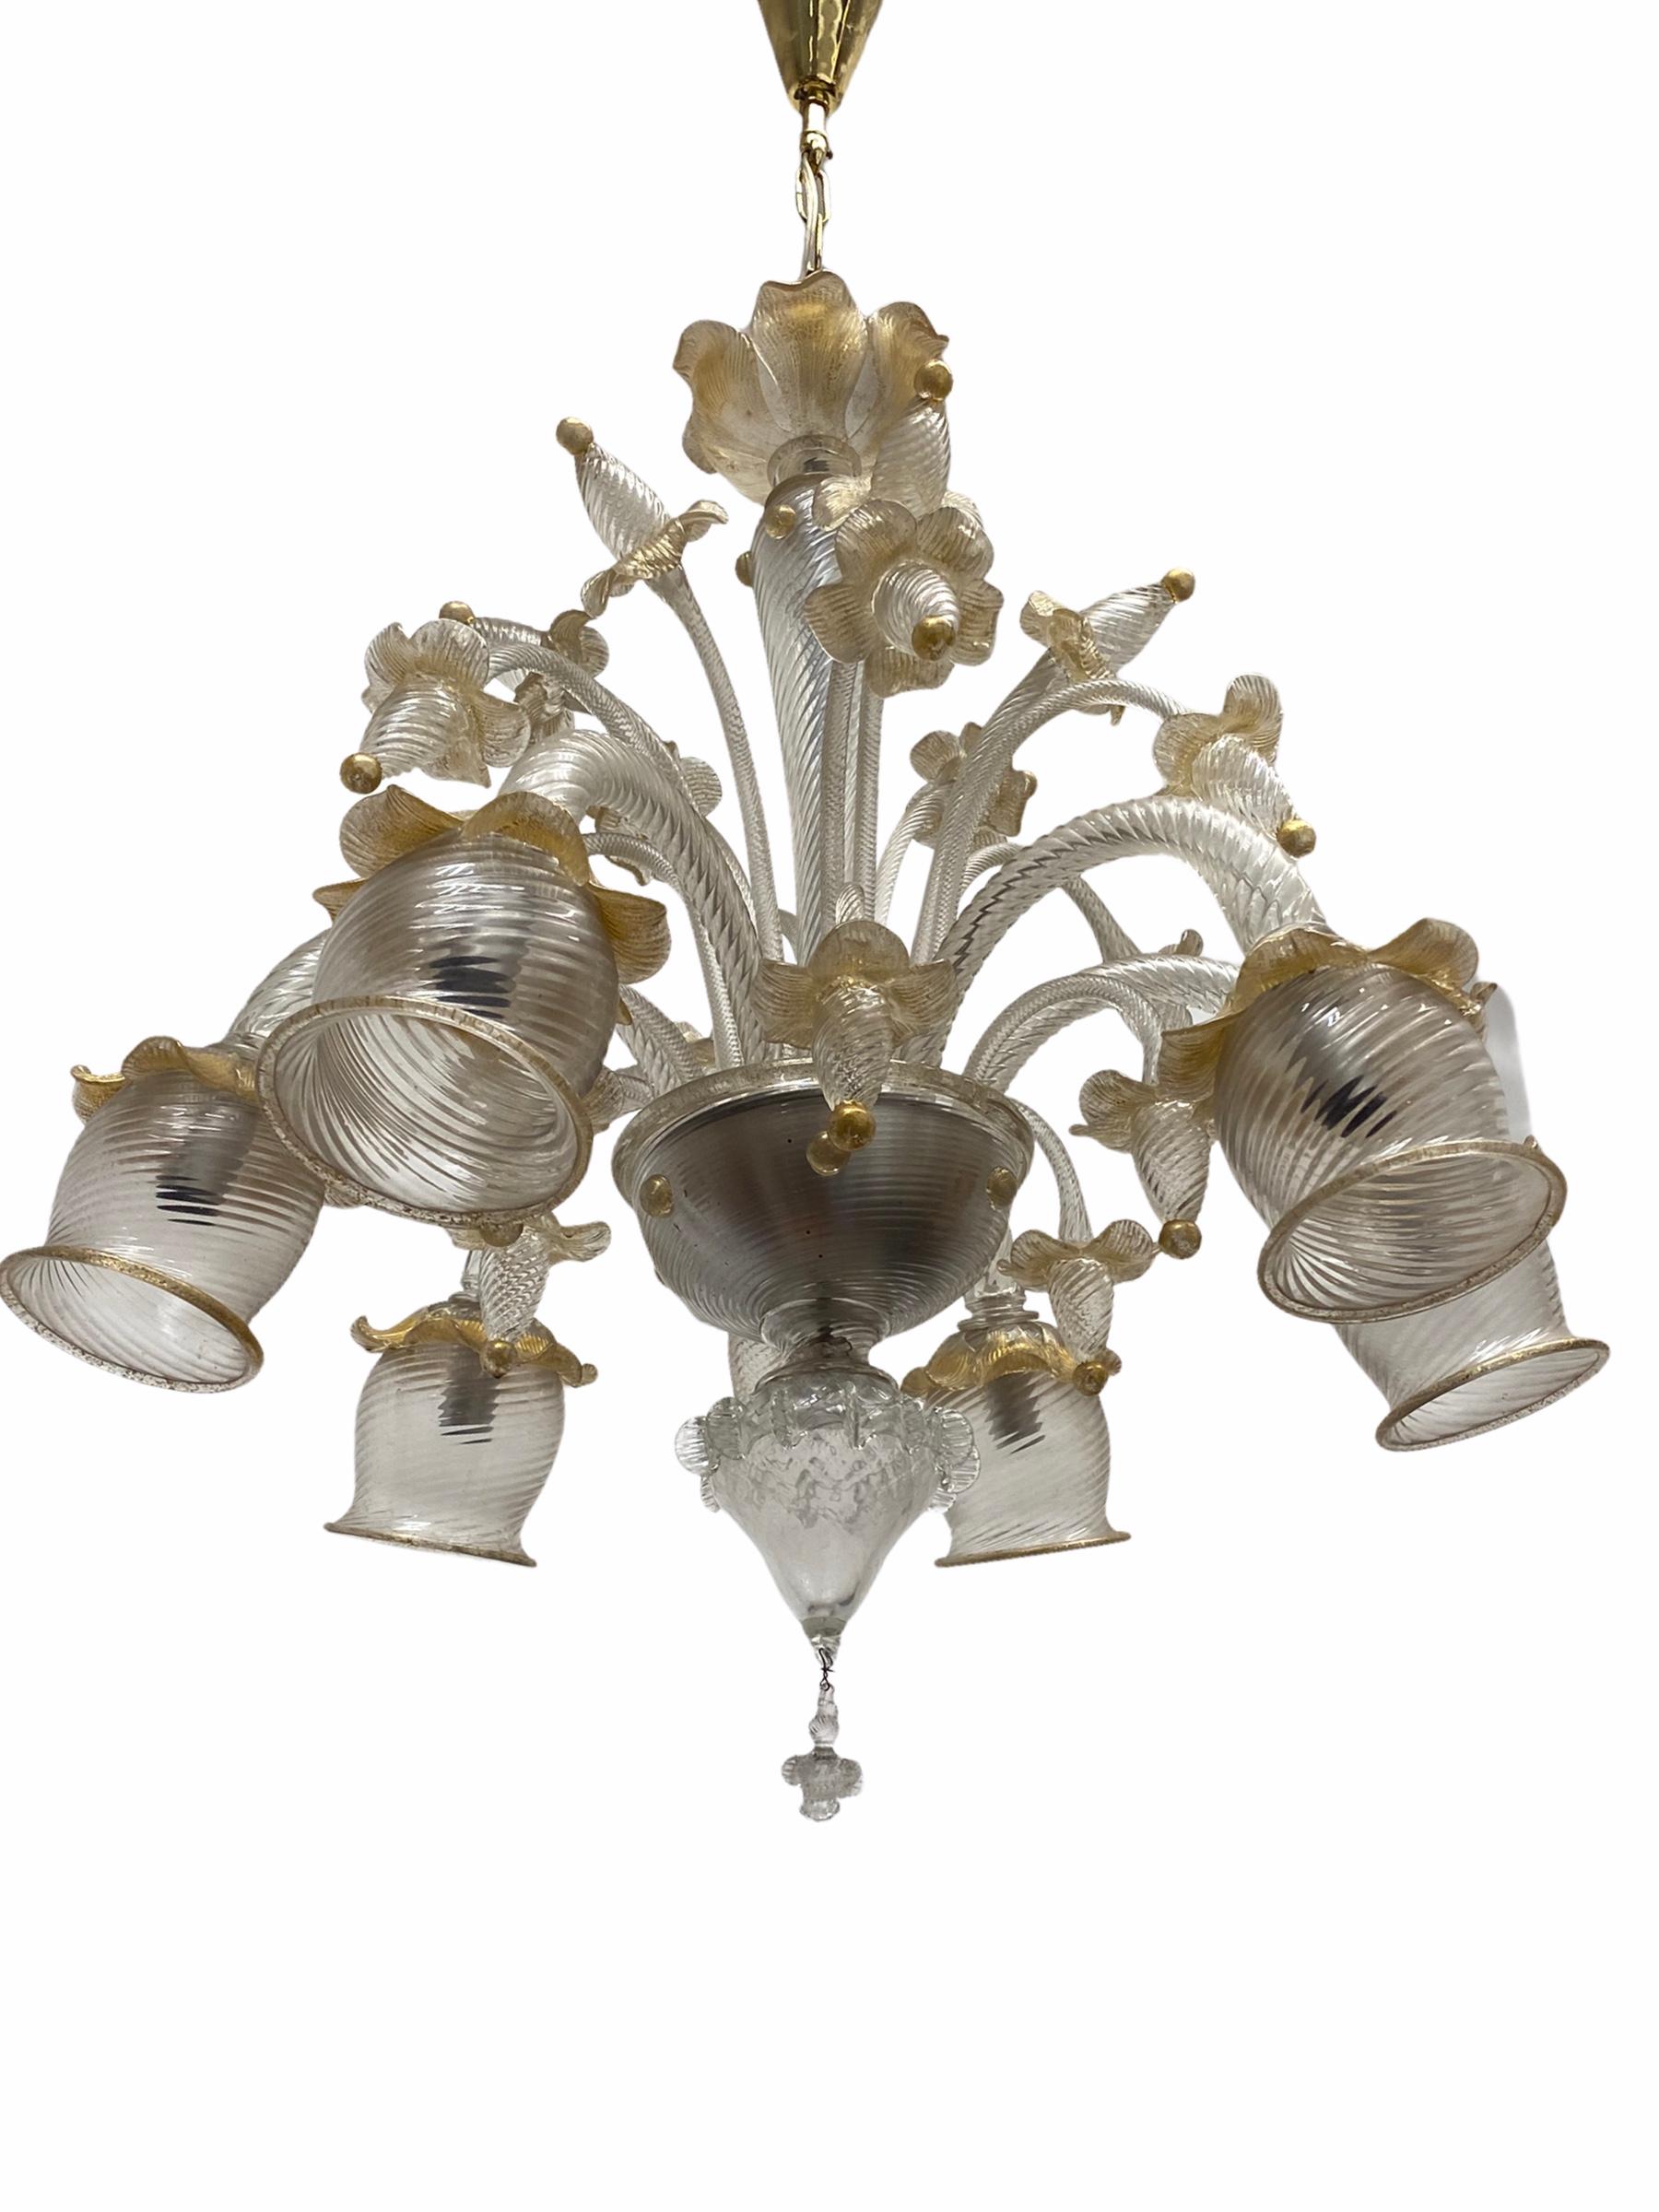 Metal Stunning Gold Dusted Murano Chandelier, by Barovier Toso Murano, Italy, 1960s For Sale